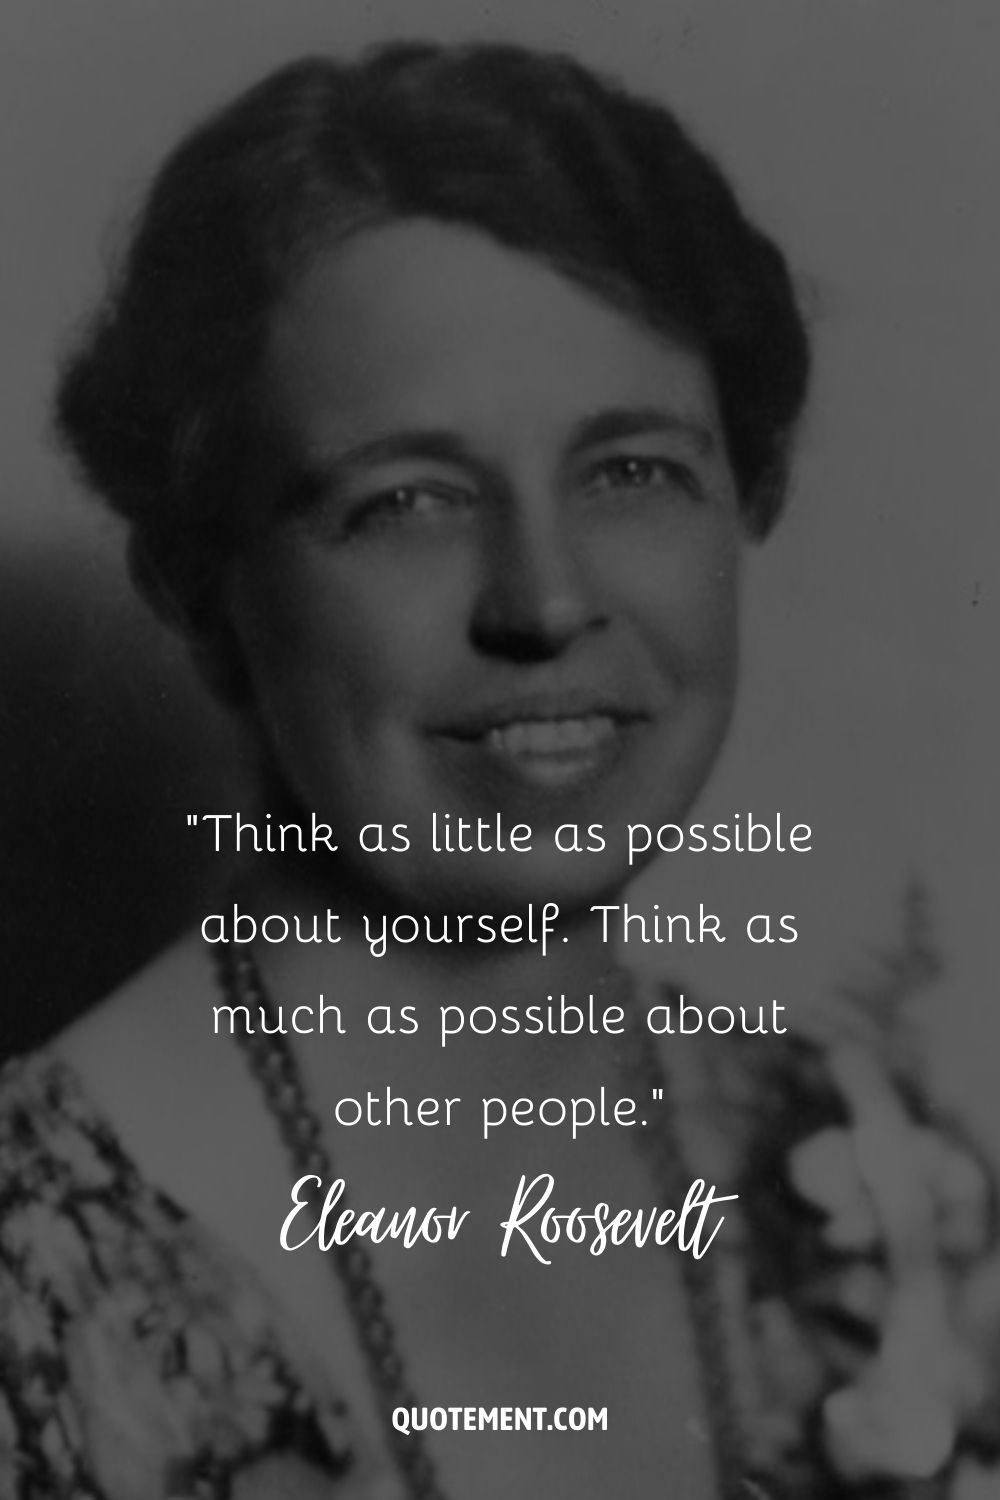 Image of a woman of courage representing a quote by Elanor Roosevelt.
